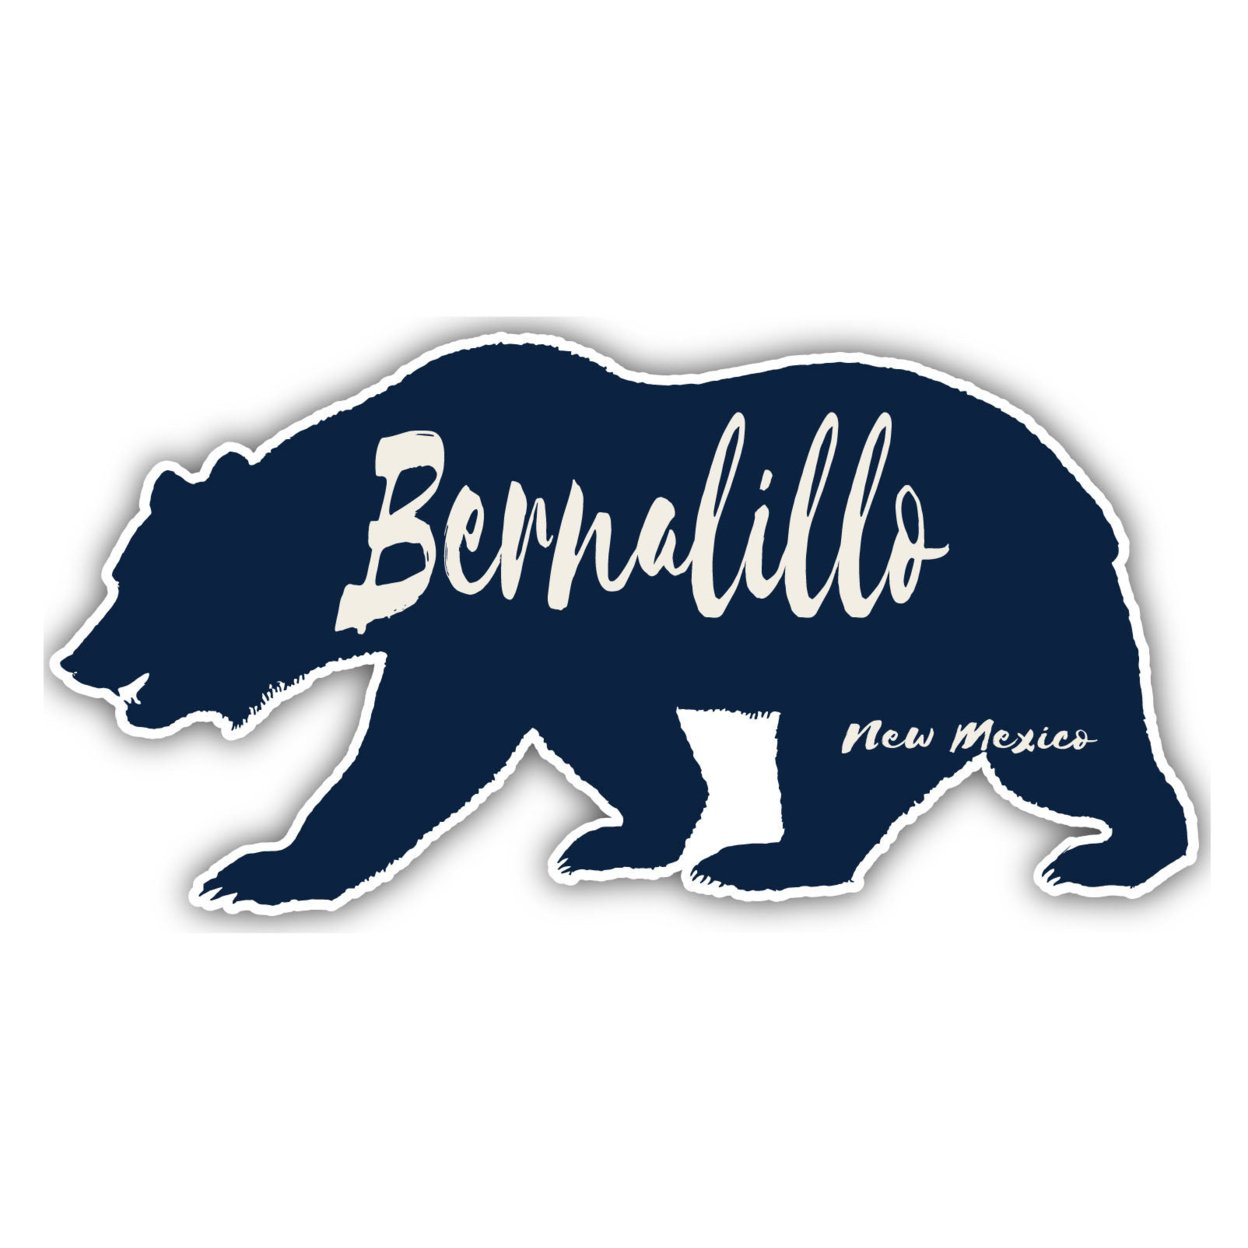 Bernalillo New Mexico Souvenir Decorative Stickers (Choose Theme And Size) - 4-Pack, 8-Inch, Bear